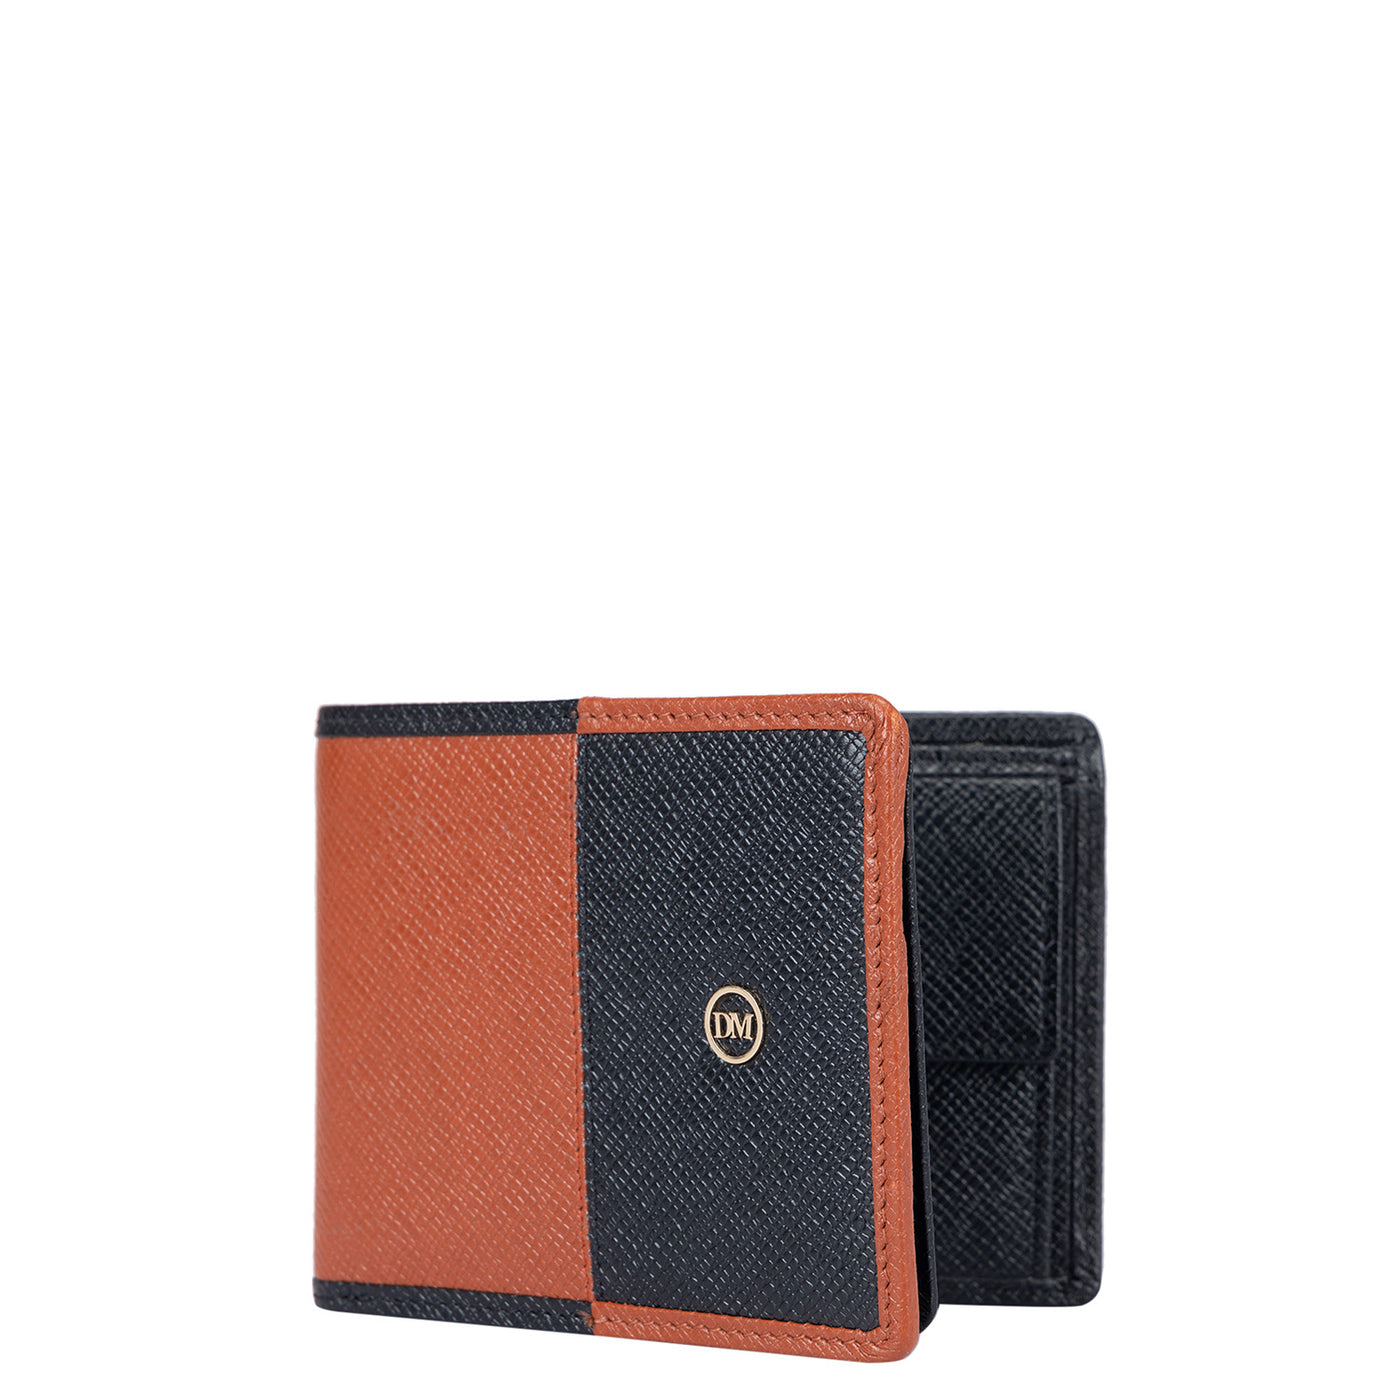 Franzy Leather Mens Wallet - Rust & Black